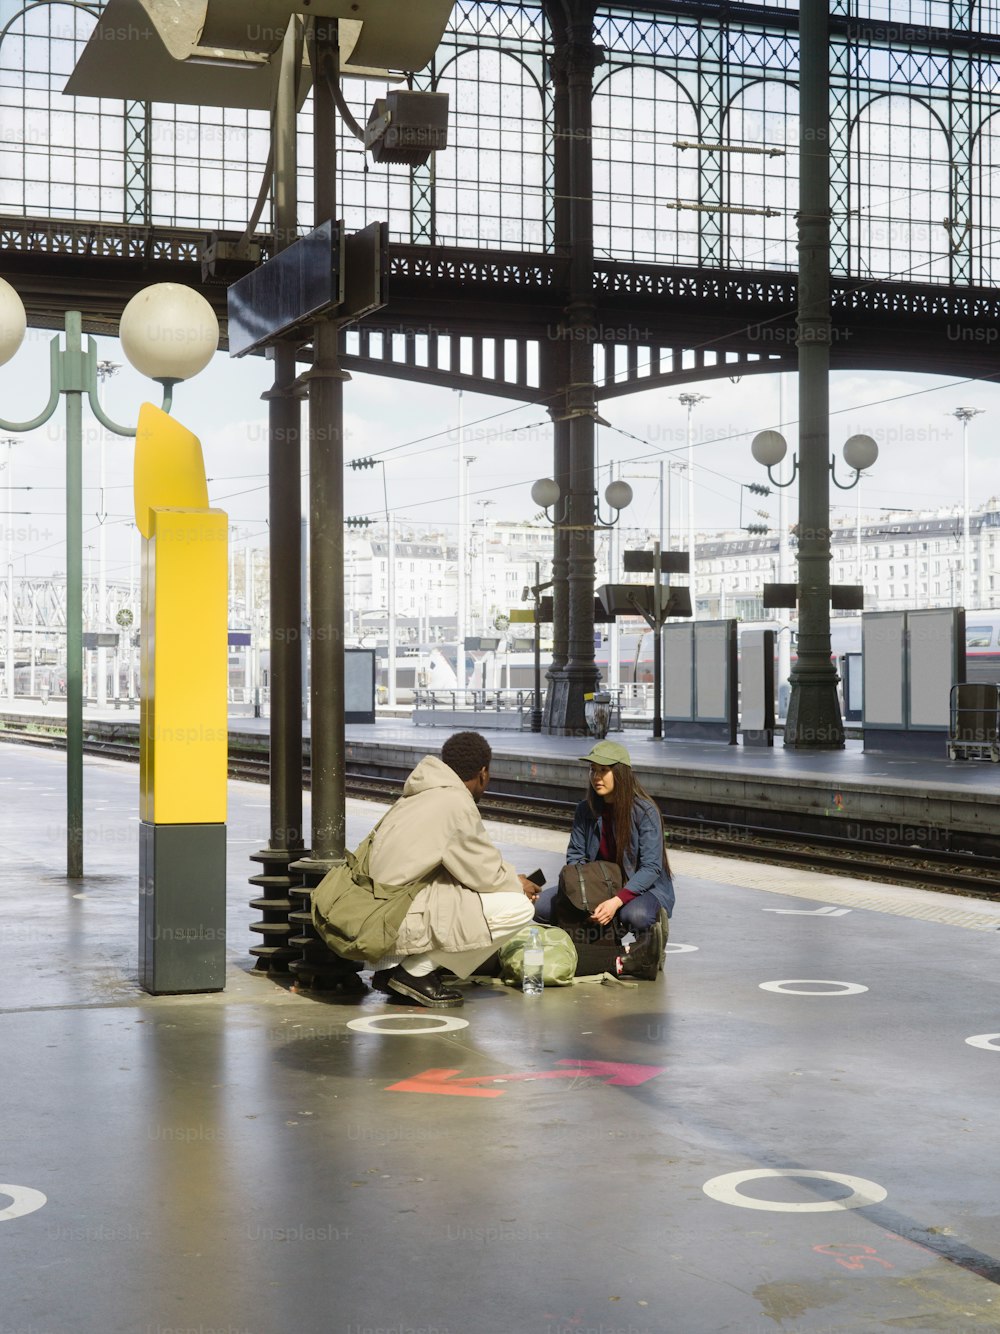 two people sitting on a bench in a train station